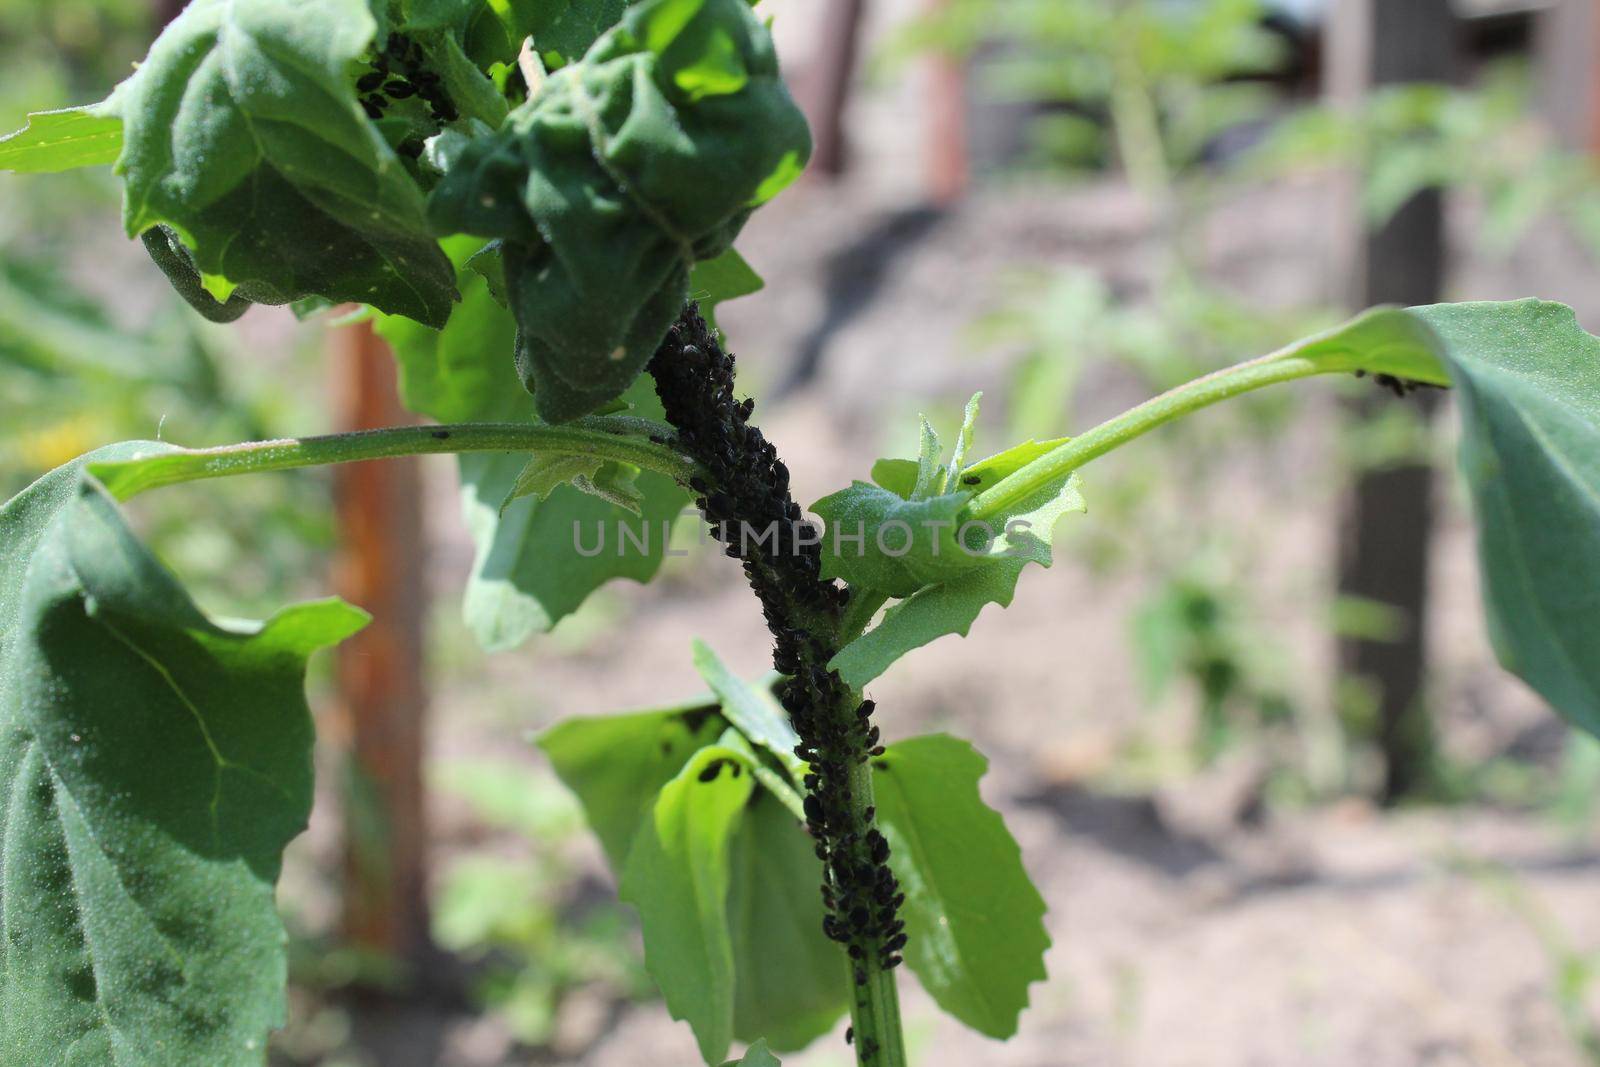 pests on plants. Aphids on the stems of plants. Garden pests. Crop by Shoba